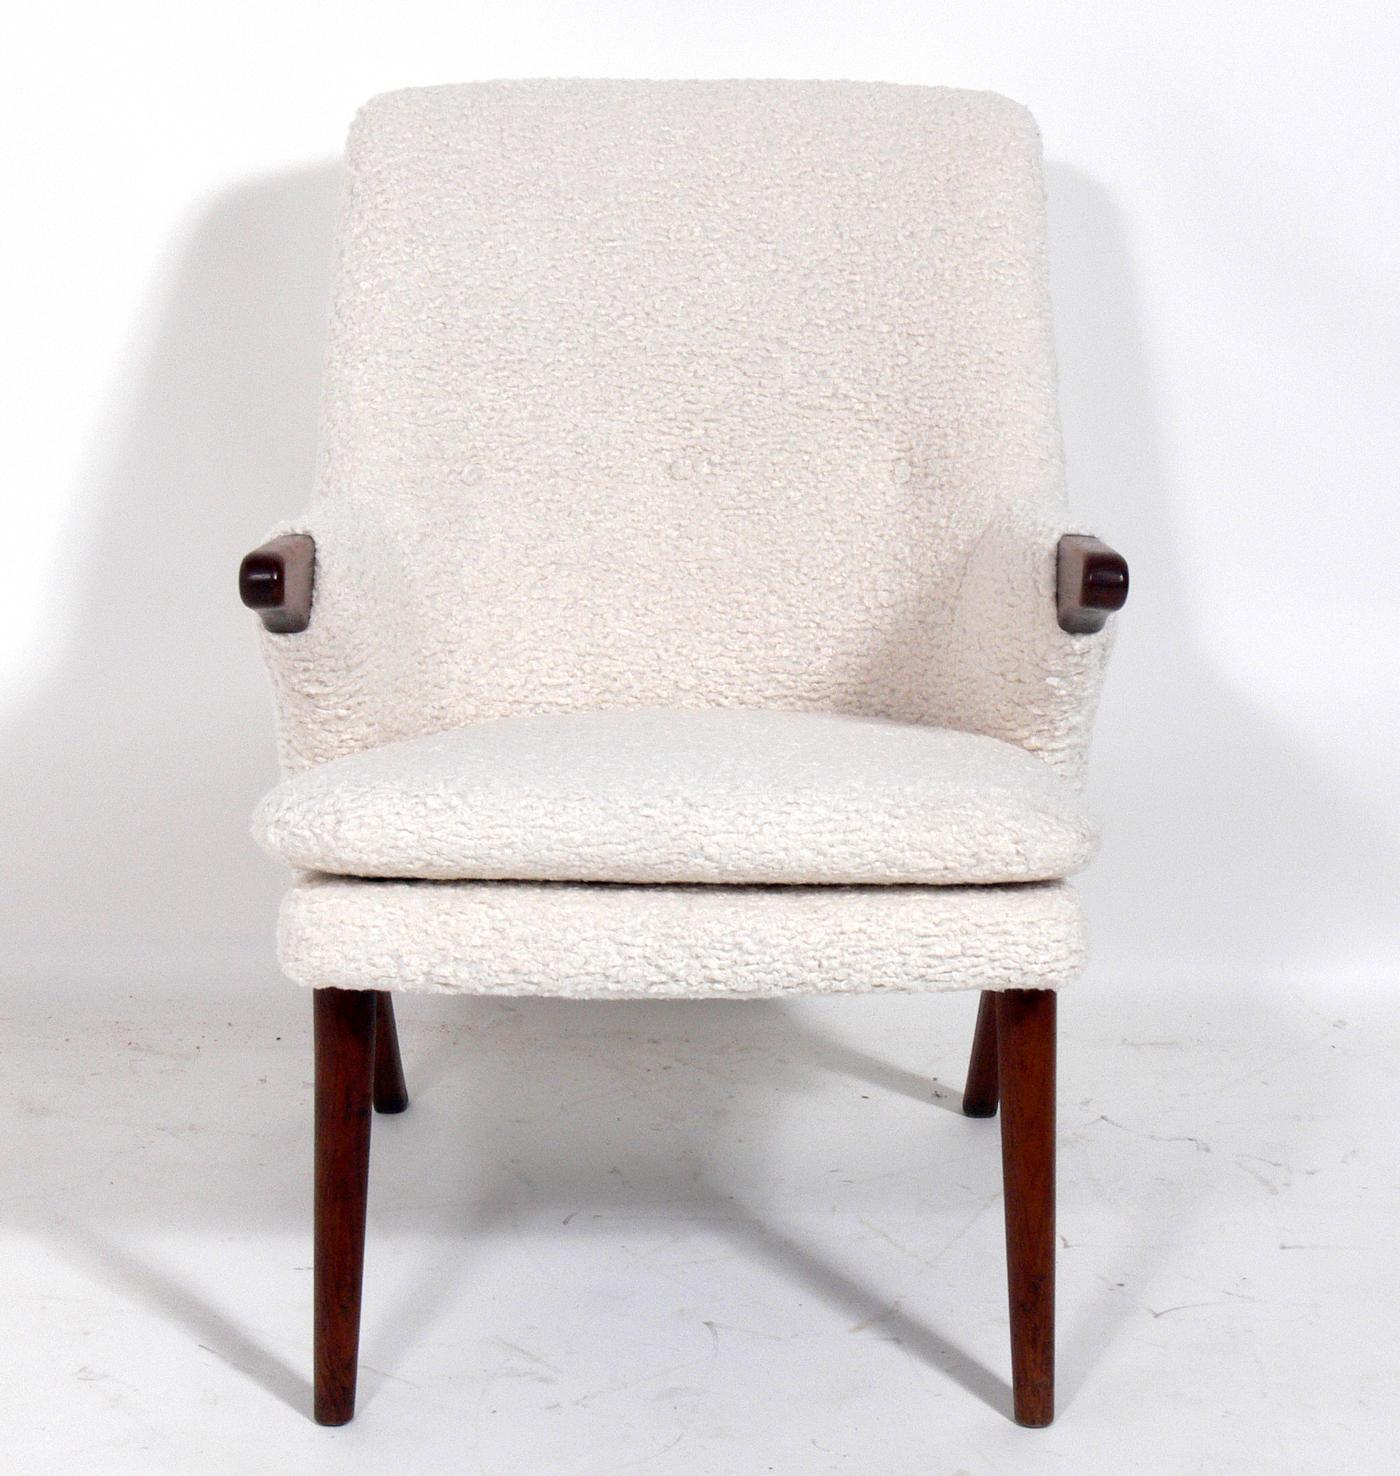 Danish modern lounge chair, in the manner of Hans Wegner, Denmark, circa 1960s. Very sculptural form reminiscent of Wegner's Papa Bear chair. This chair has been recently reupholstered in a plush faux sheepskin. Teak arms and legs have been cleaned